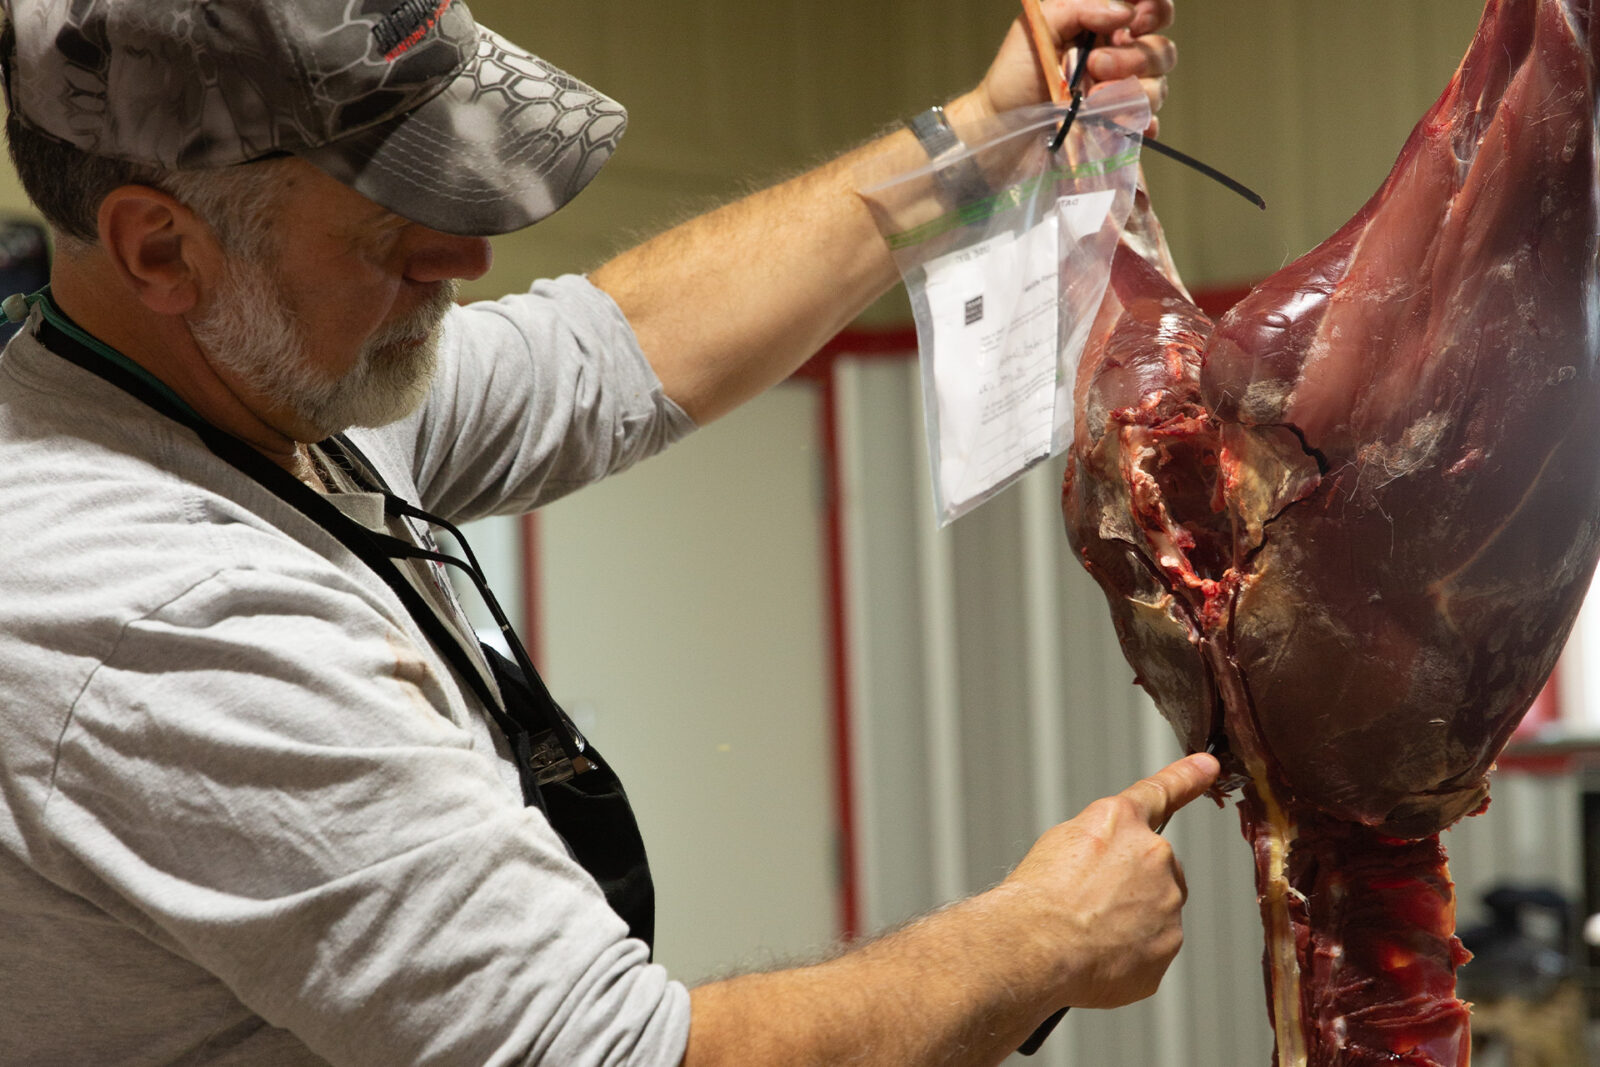 A butcher processes game meat.